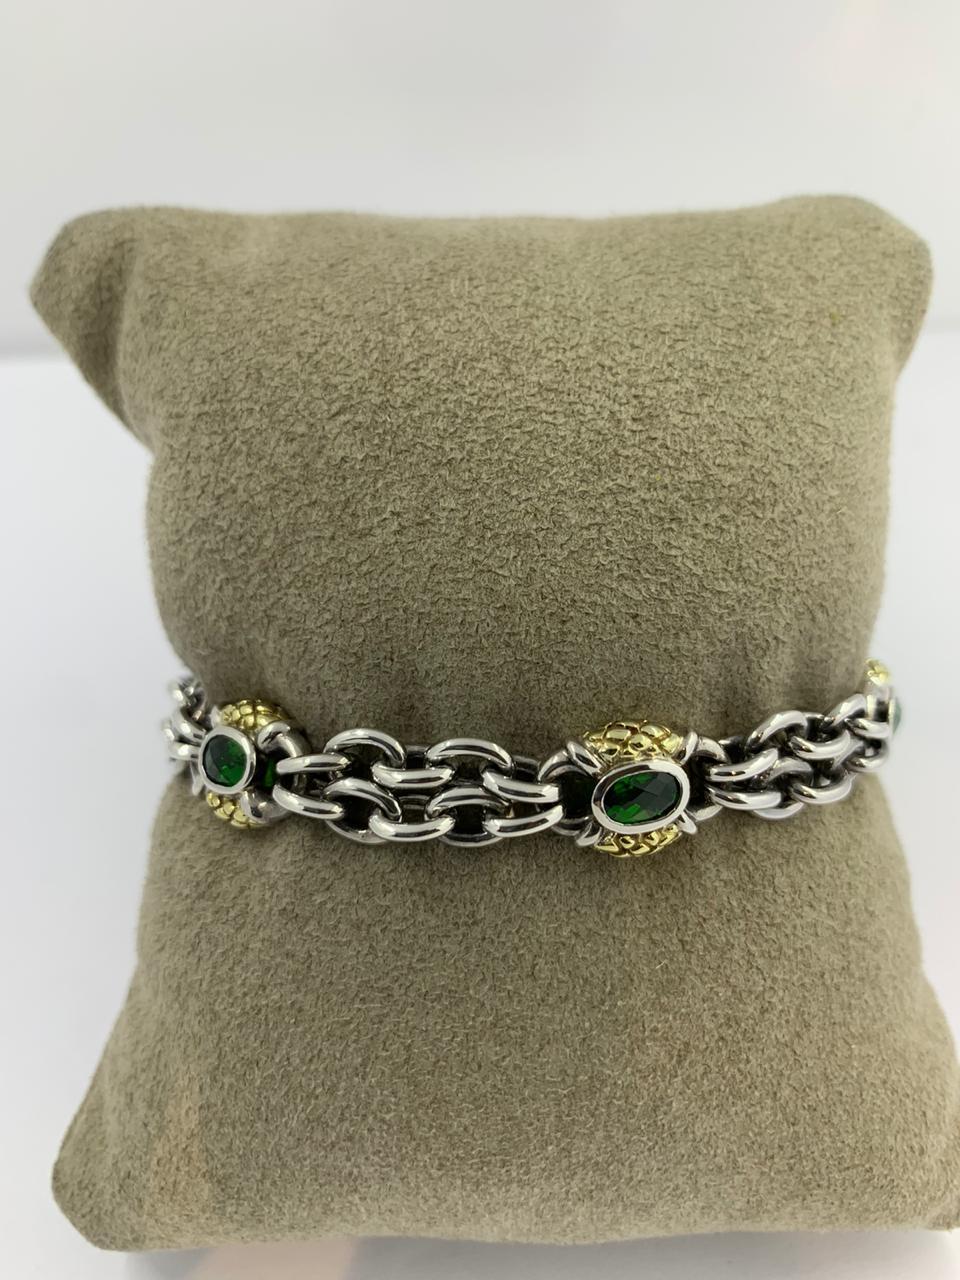 Scott Kay Silver and Gold Bracelet
1 row of silver and 18Kt gold link bracelet with green iolite stones
SKS-10265